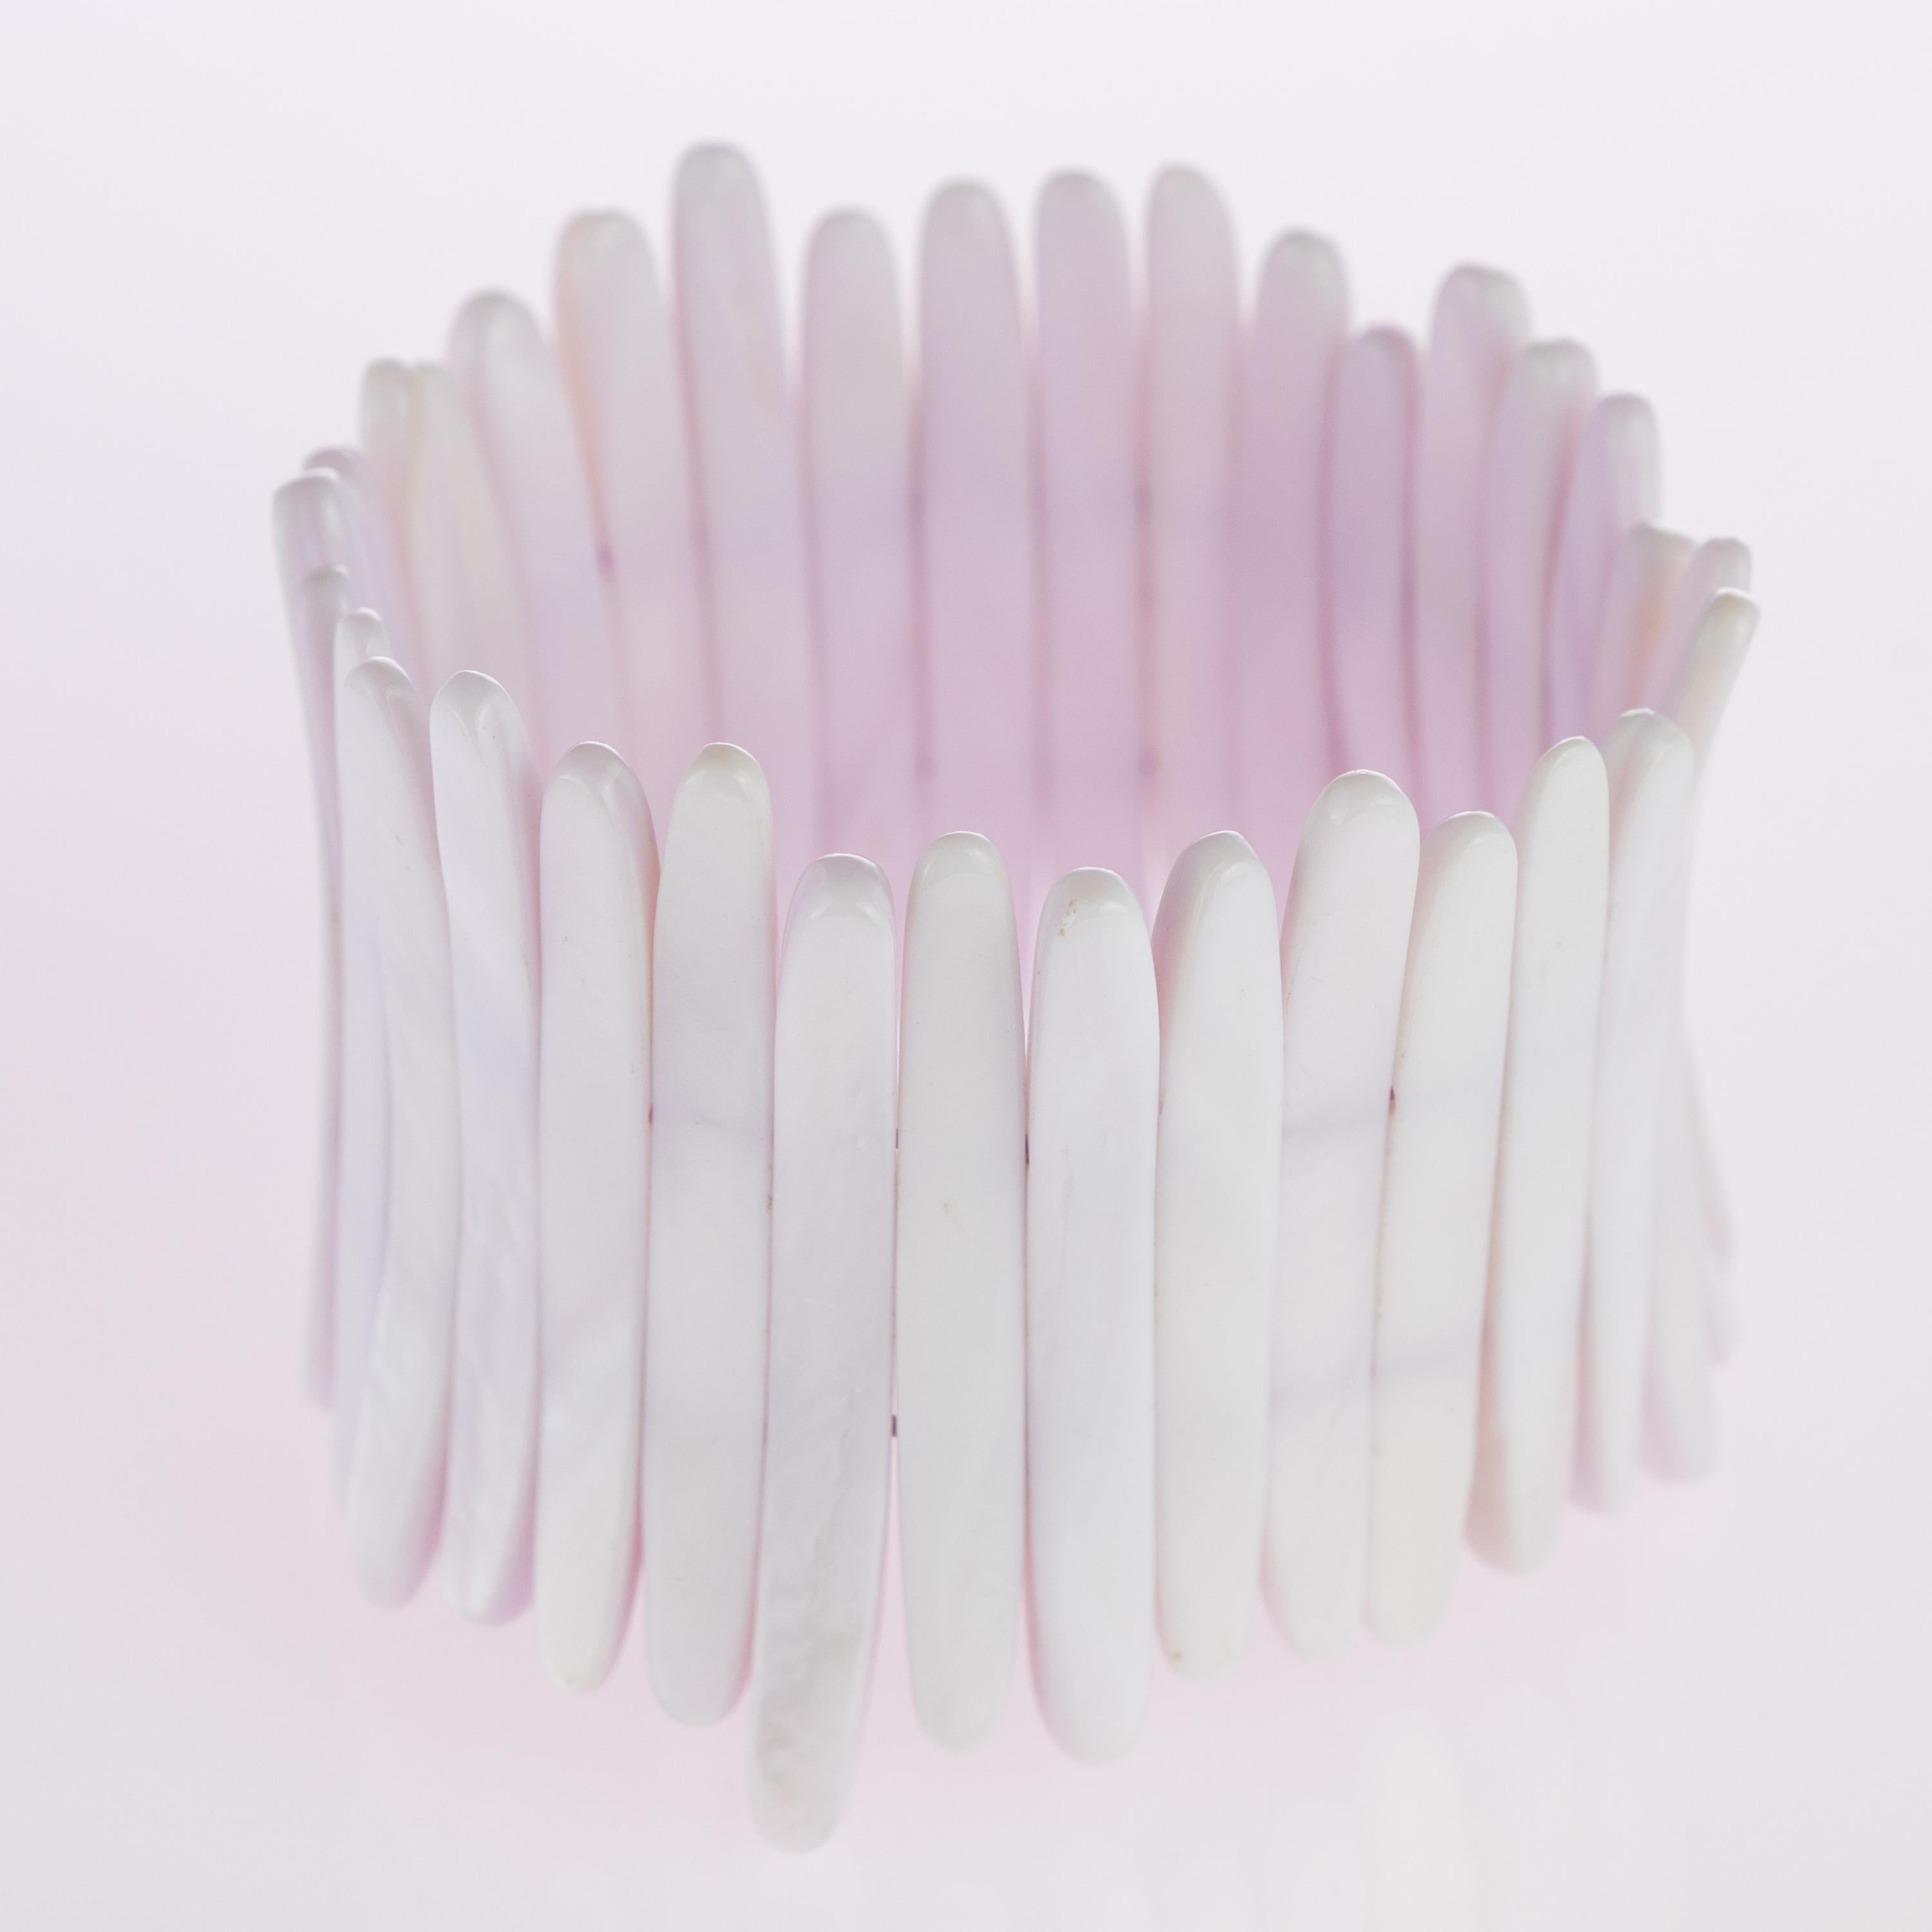 Iconic and stunning lilac mother of pearl stretch beaded iconic bracelet. Full of design and beauty for a perfect cocktail night.

The mother of pearl is an organic-inorganic composite material; it is the inner shell layer, and makes up the